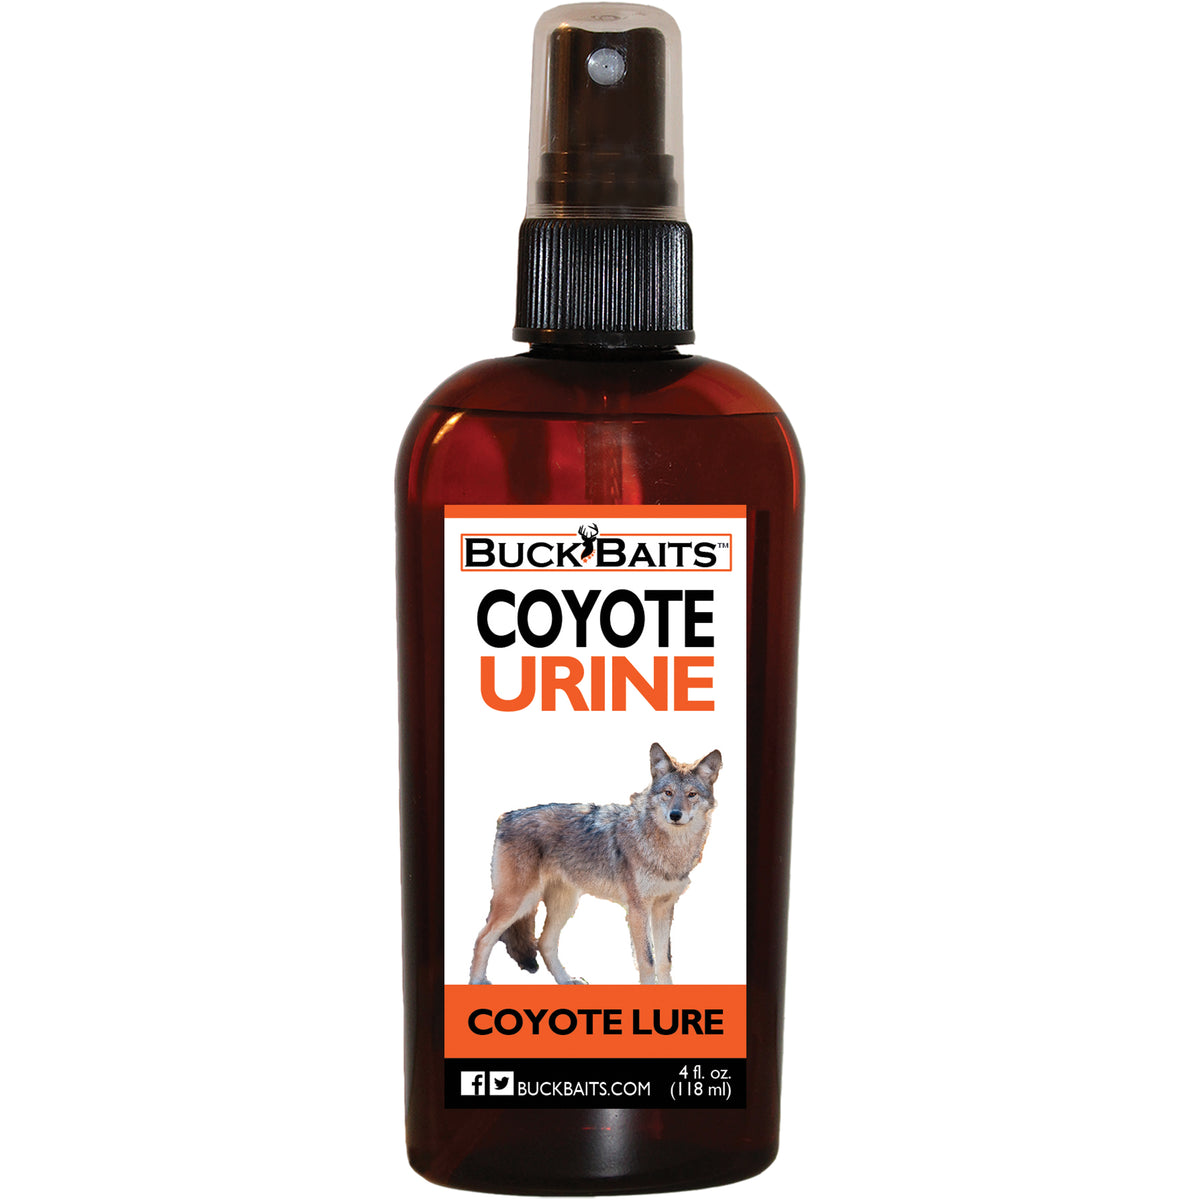 Coyote Urine Lure and Deterrent 4 oz.